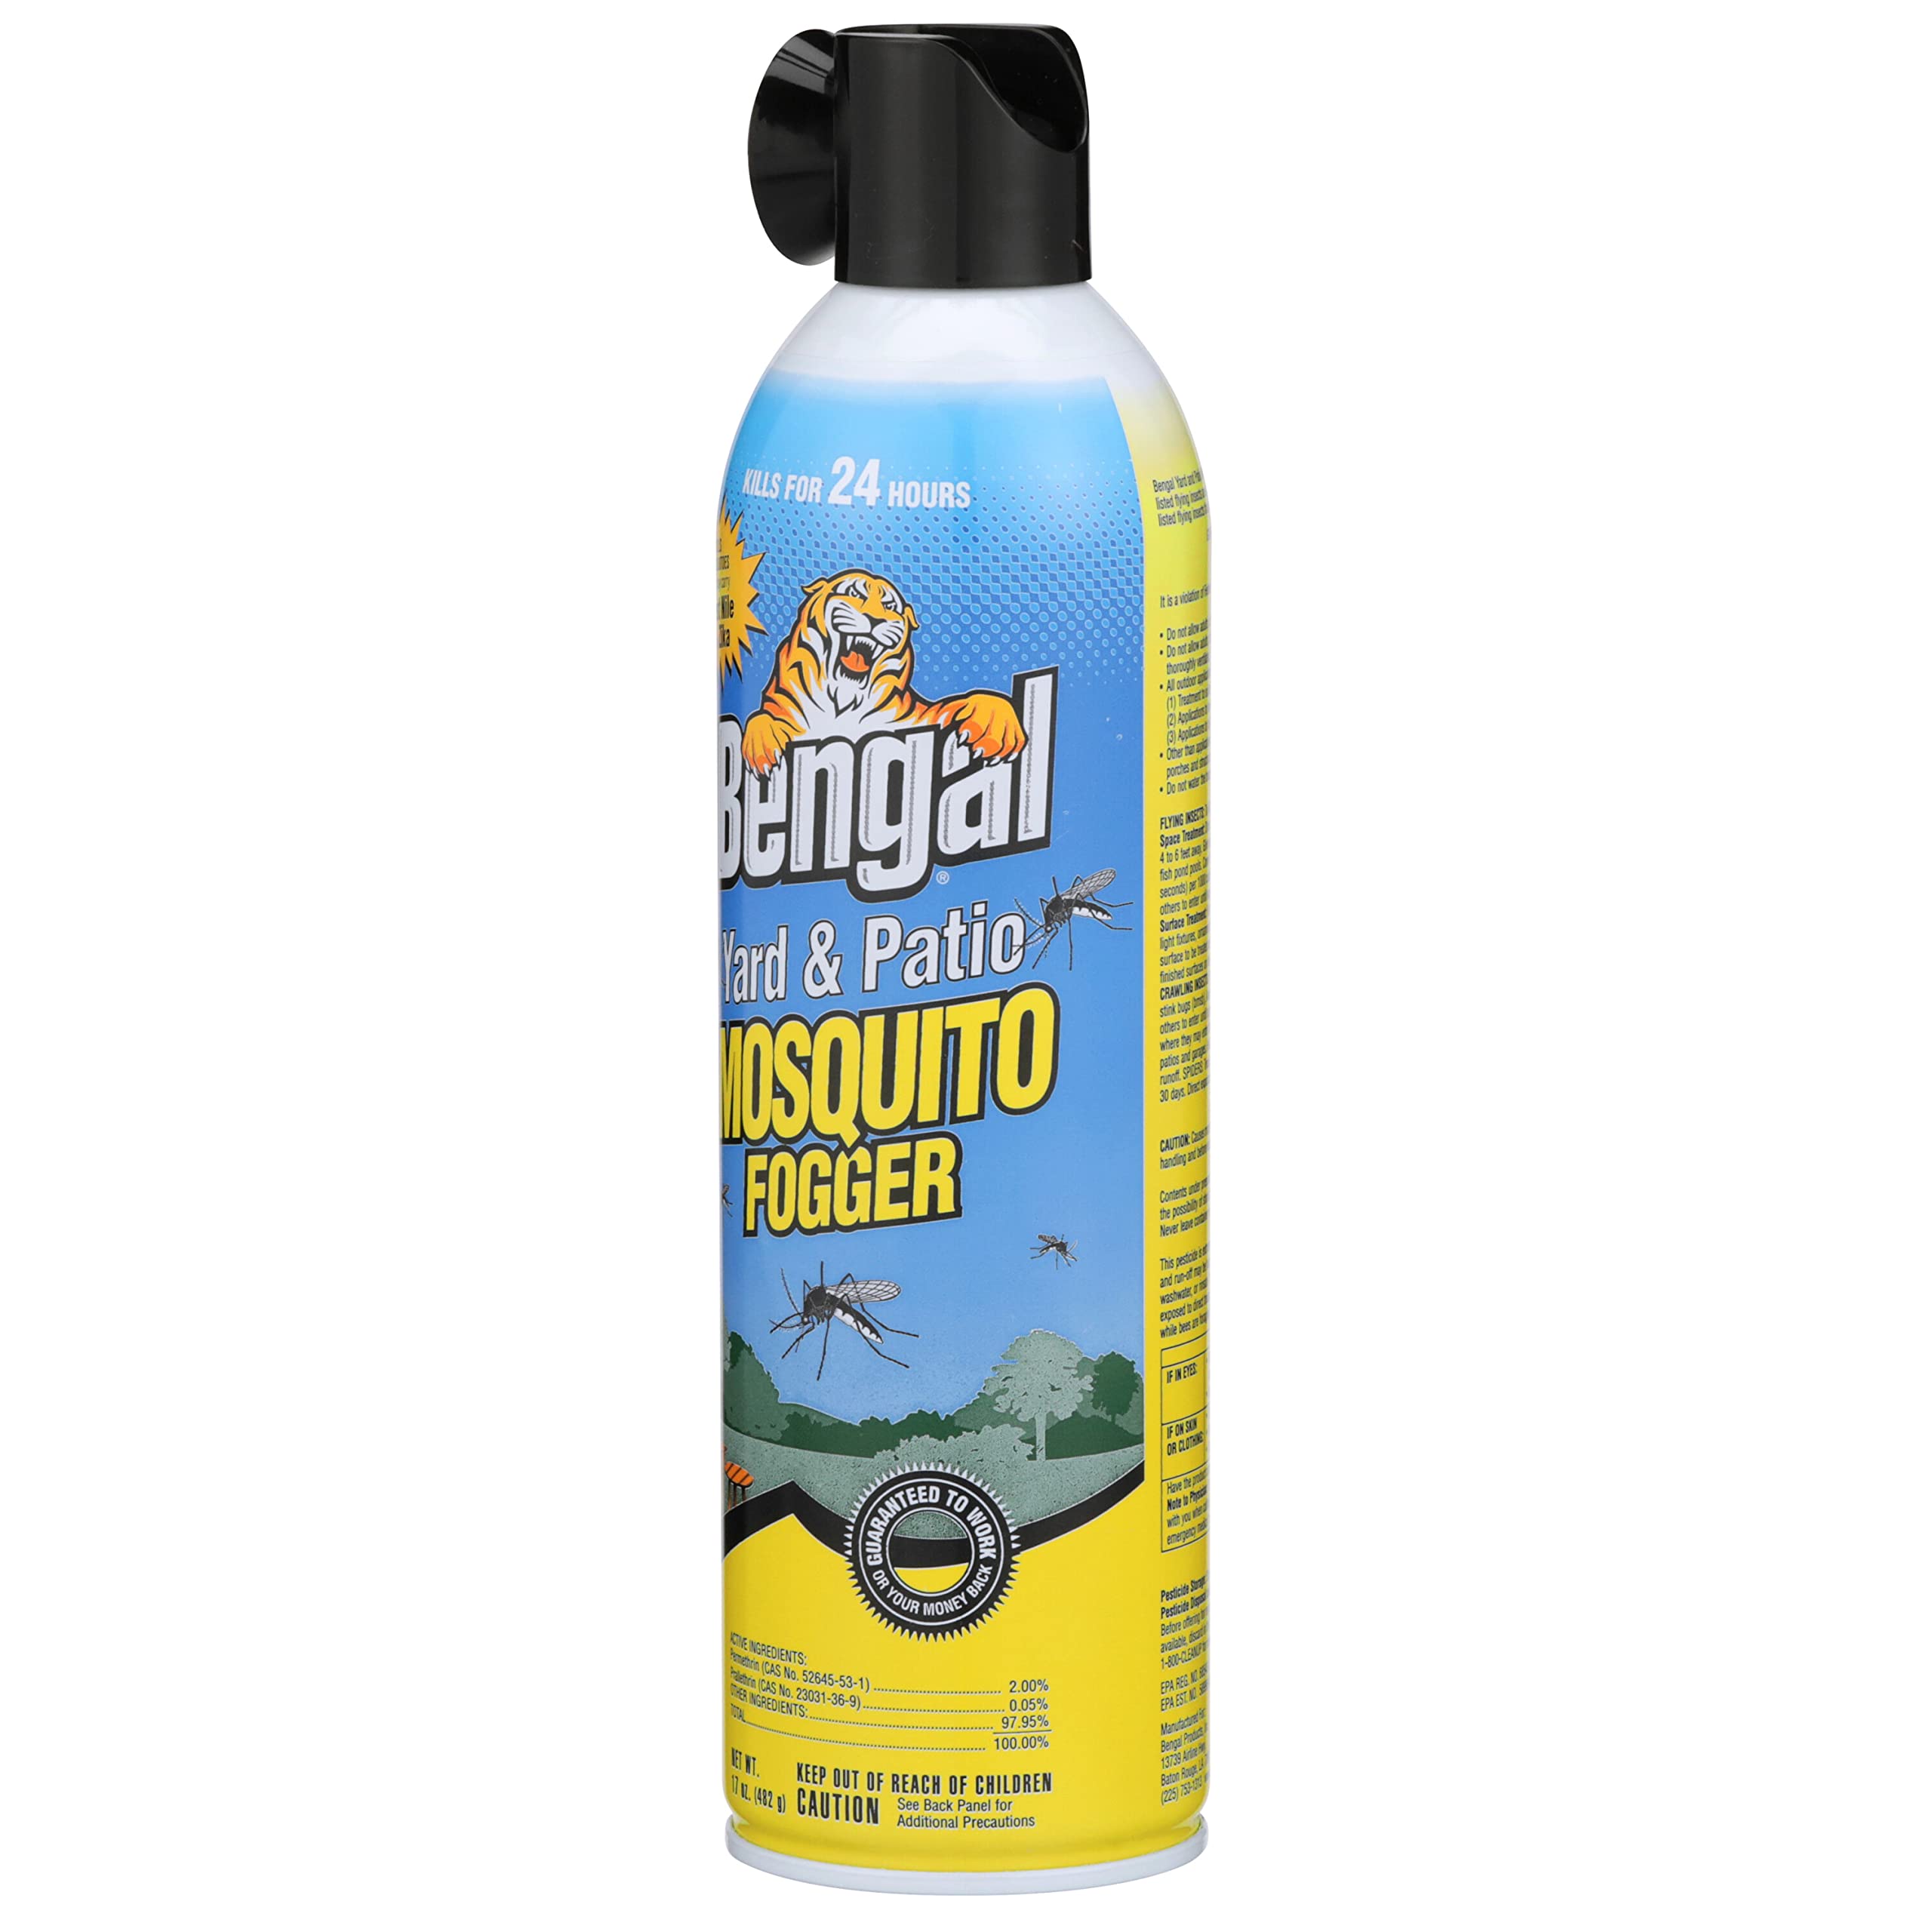 Bengal Yard and Patio Mosquito Fogger, Kills Spiders and Prevents Nesting, 17 Oz. Aerosol Can